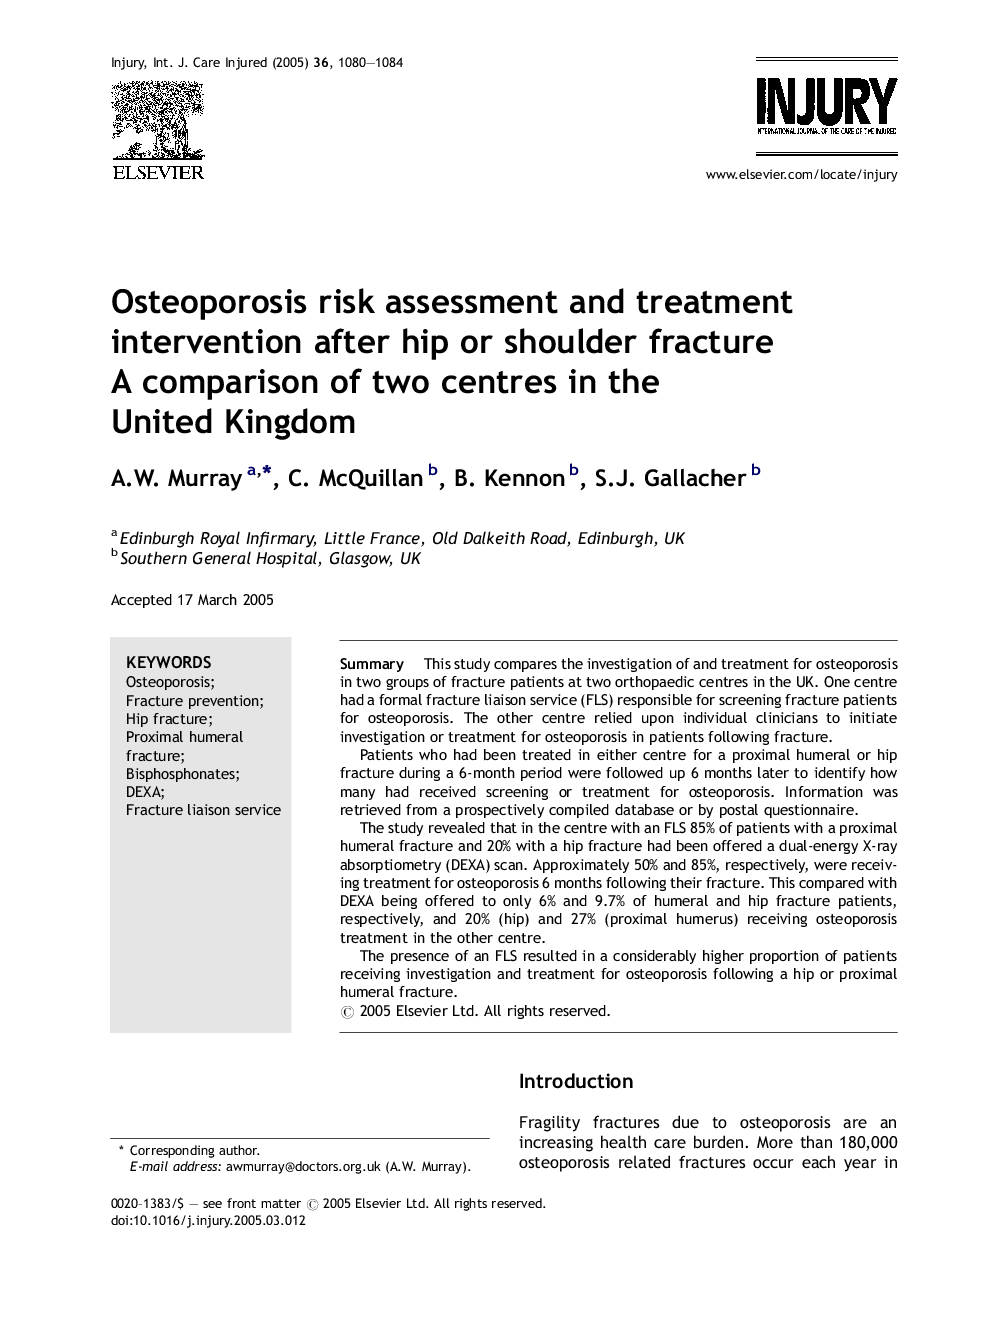 Osteoporosis risk assessment and treatment intervention after hip or shoulder fracture